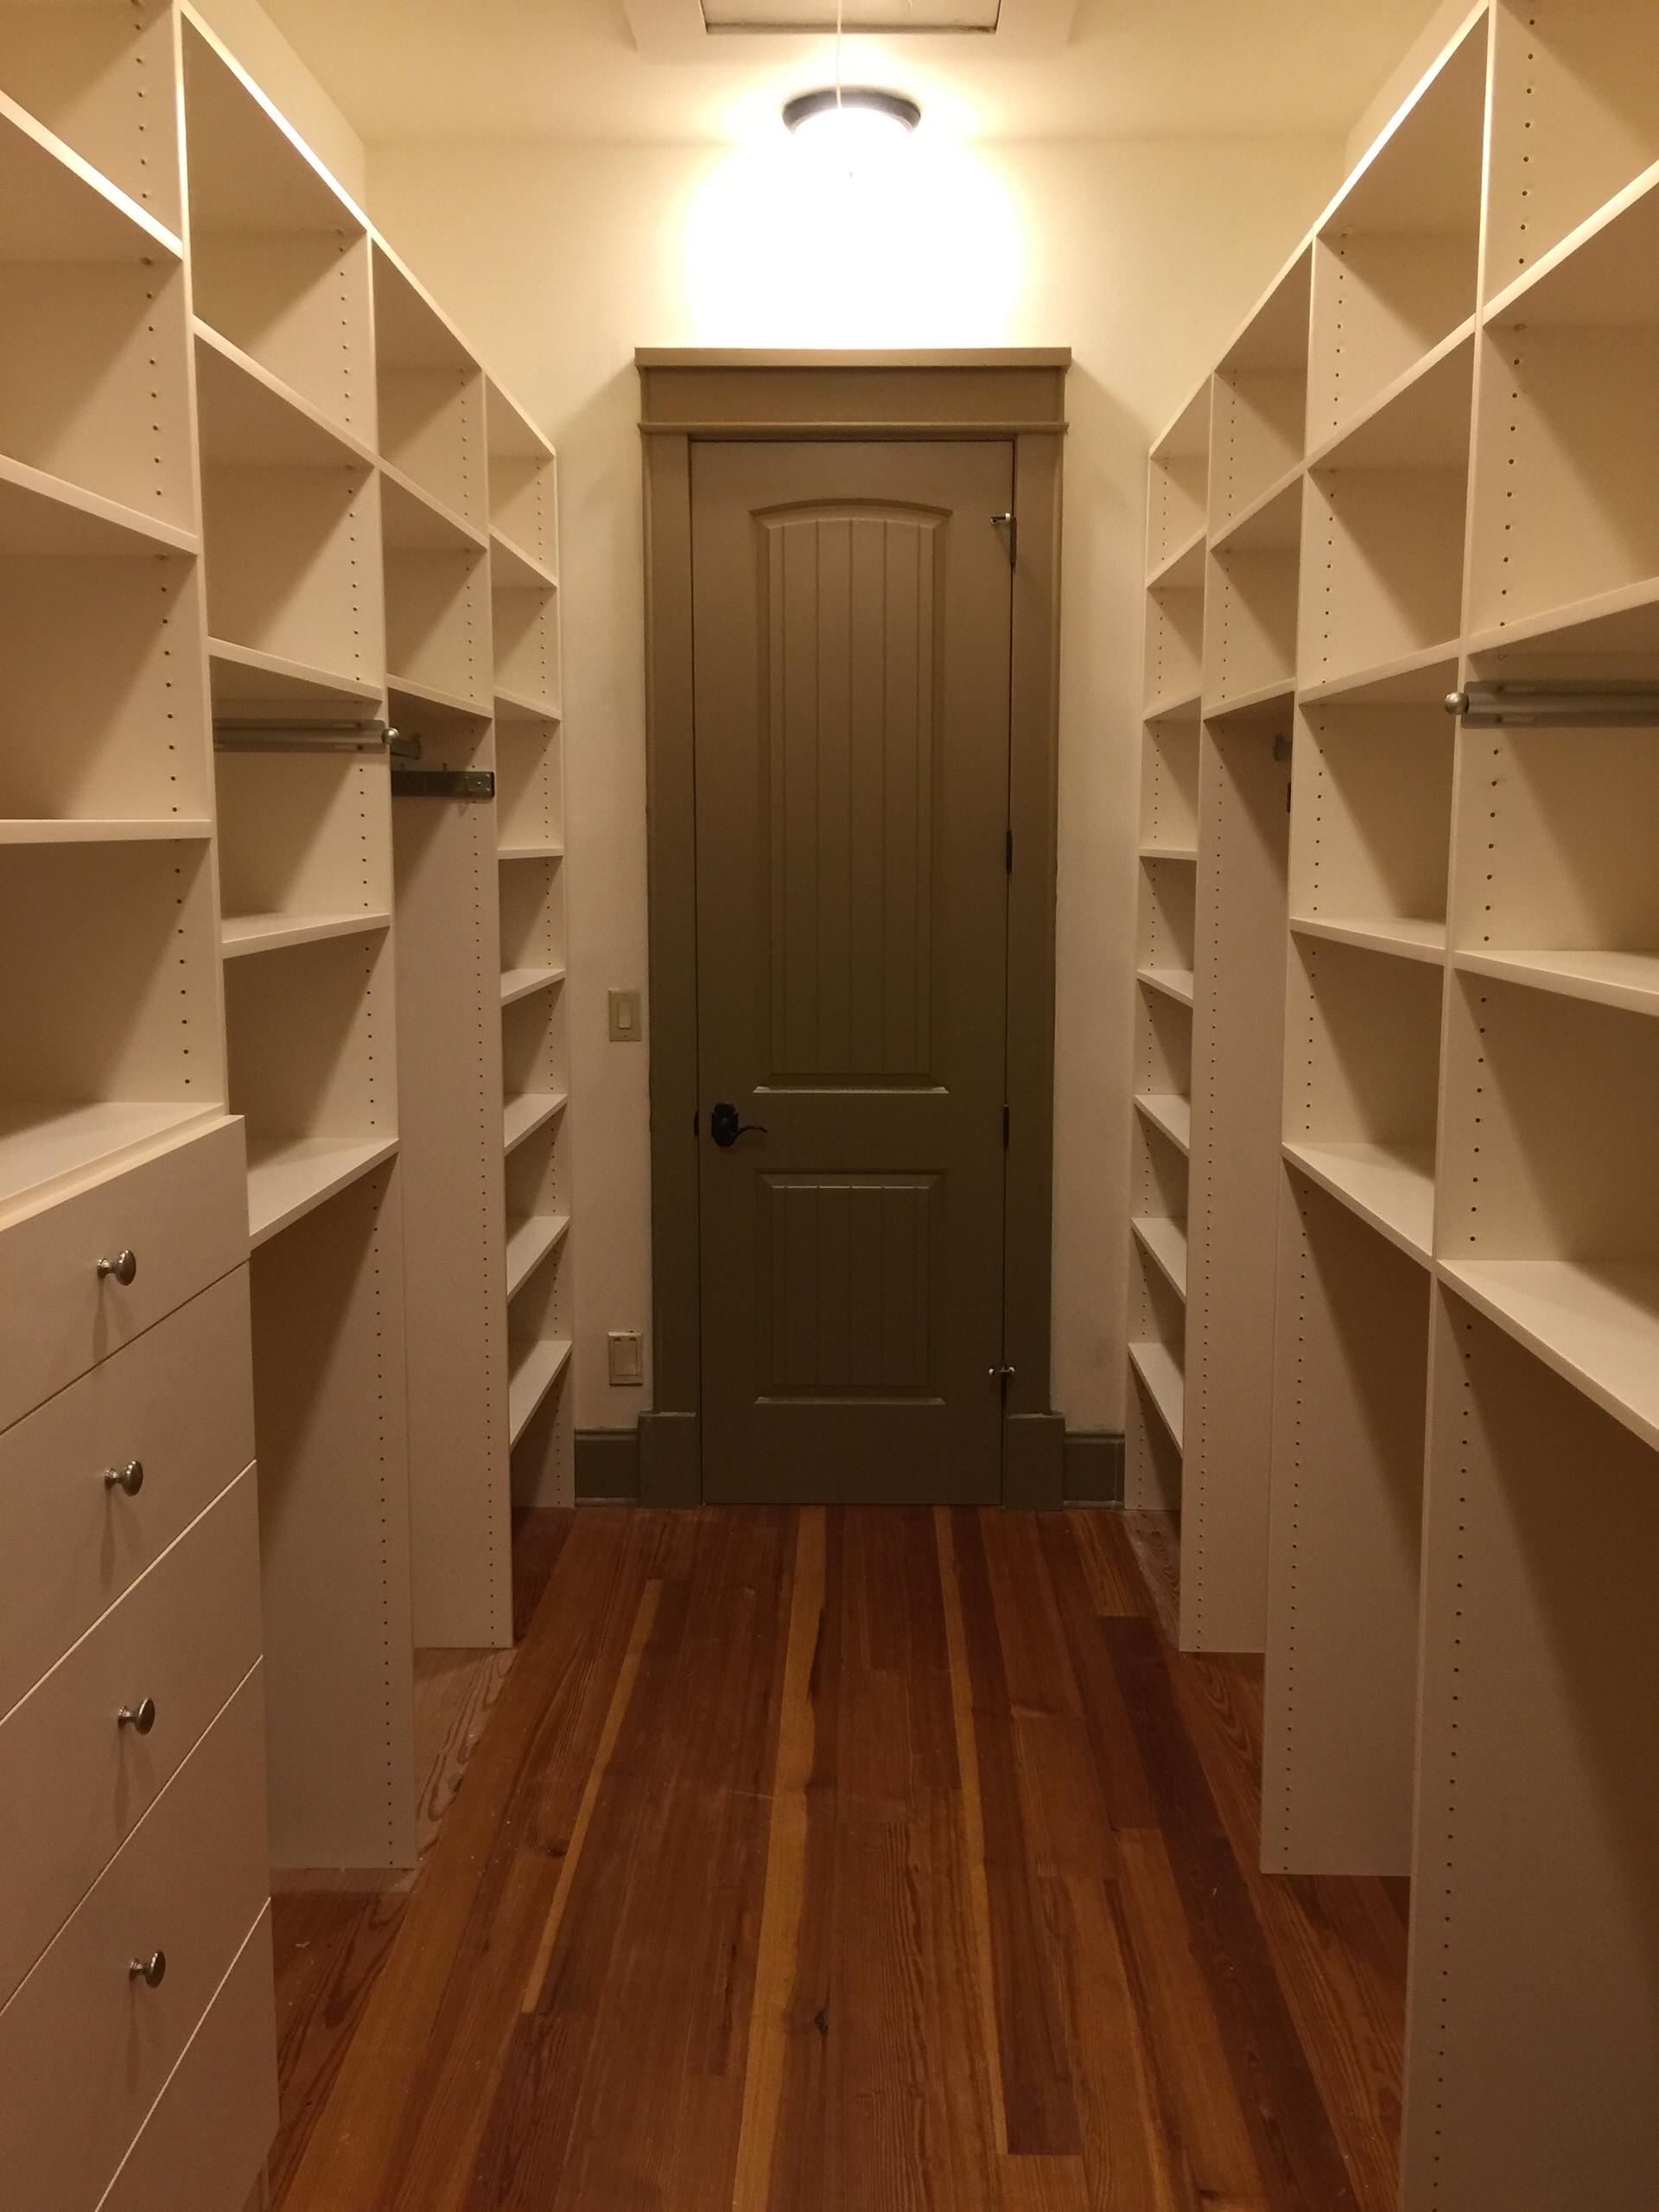 Large and beautiful spaces can make a most useful custom closets! There are adjustable shelves, single and double hanging rods, drawers and a tilt out hamper. This was installed in just one day!